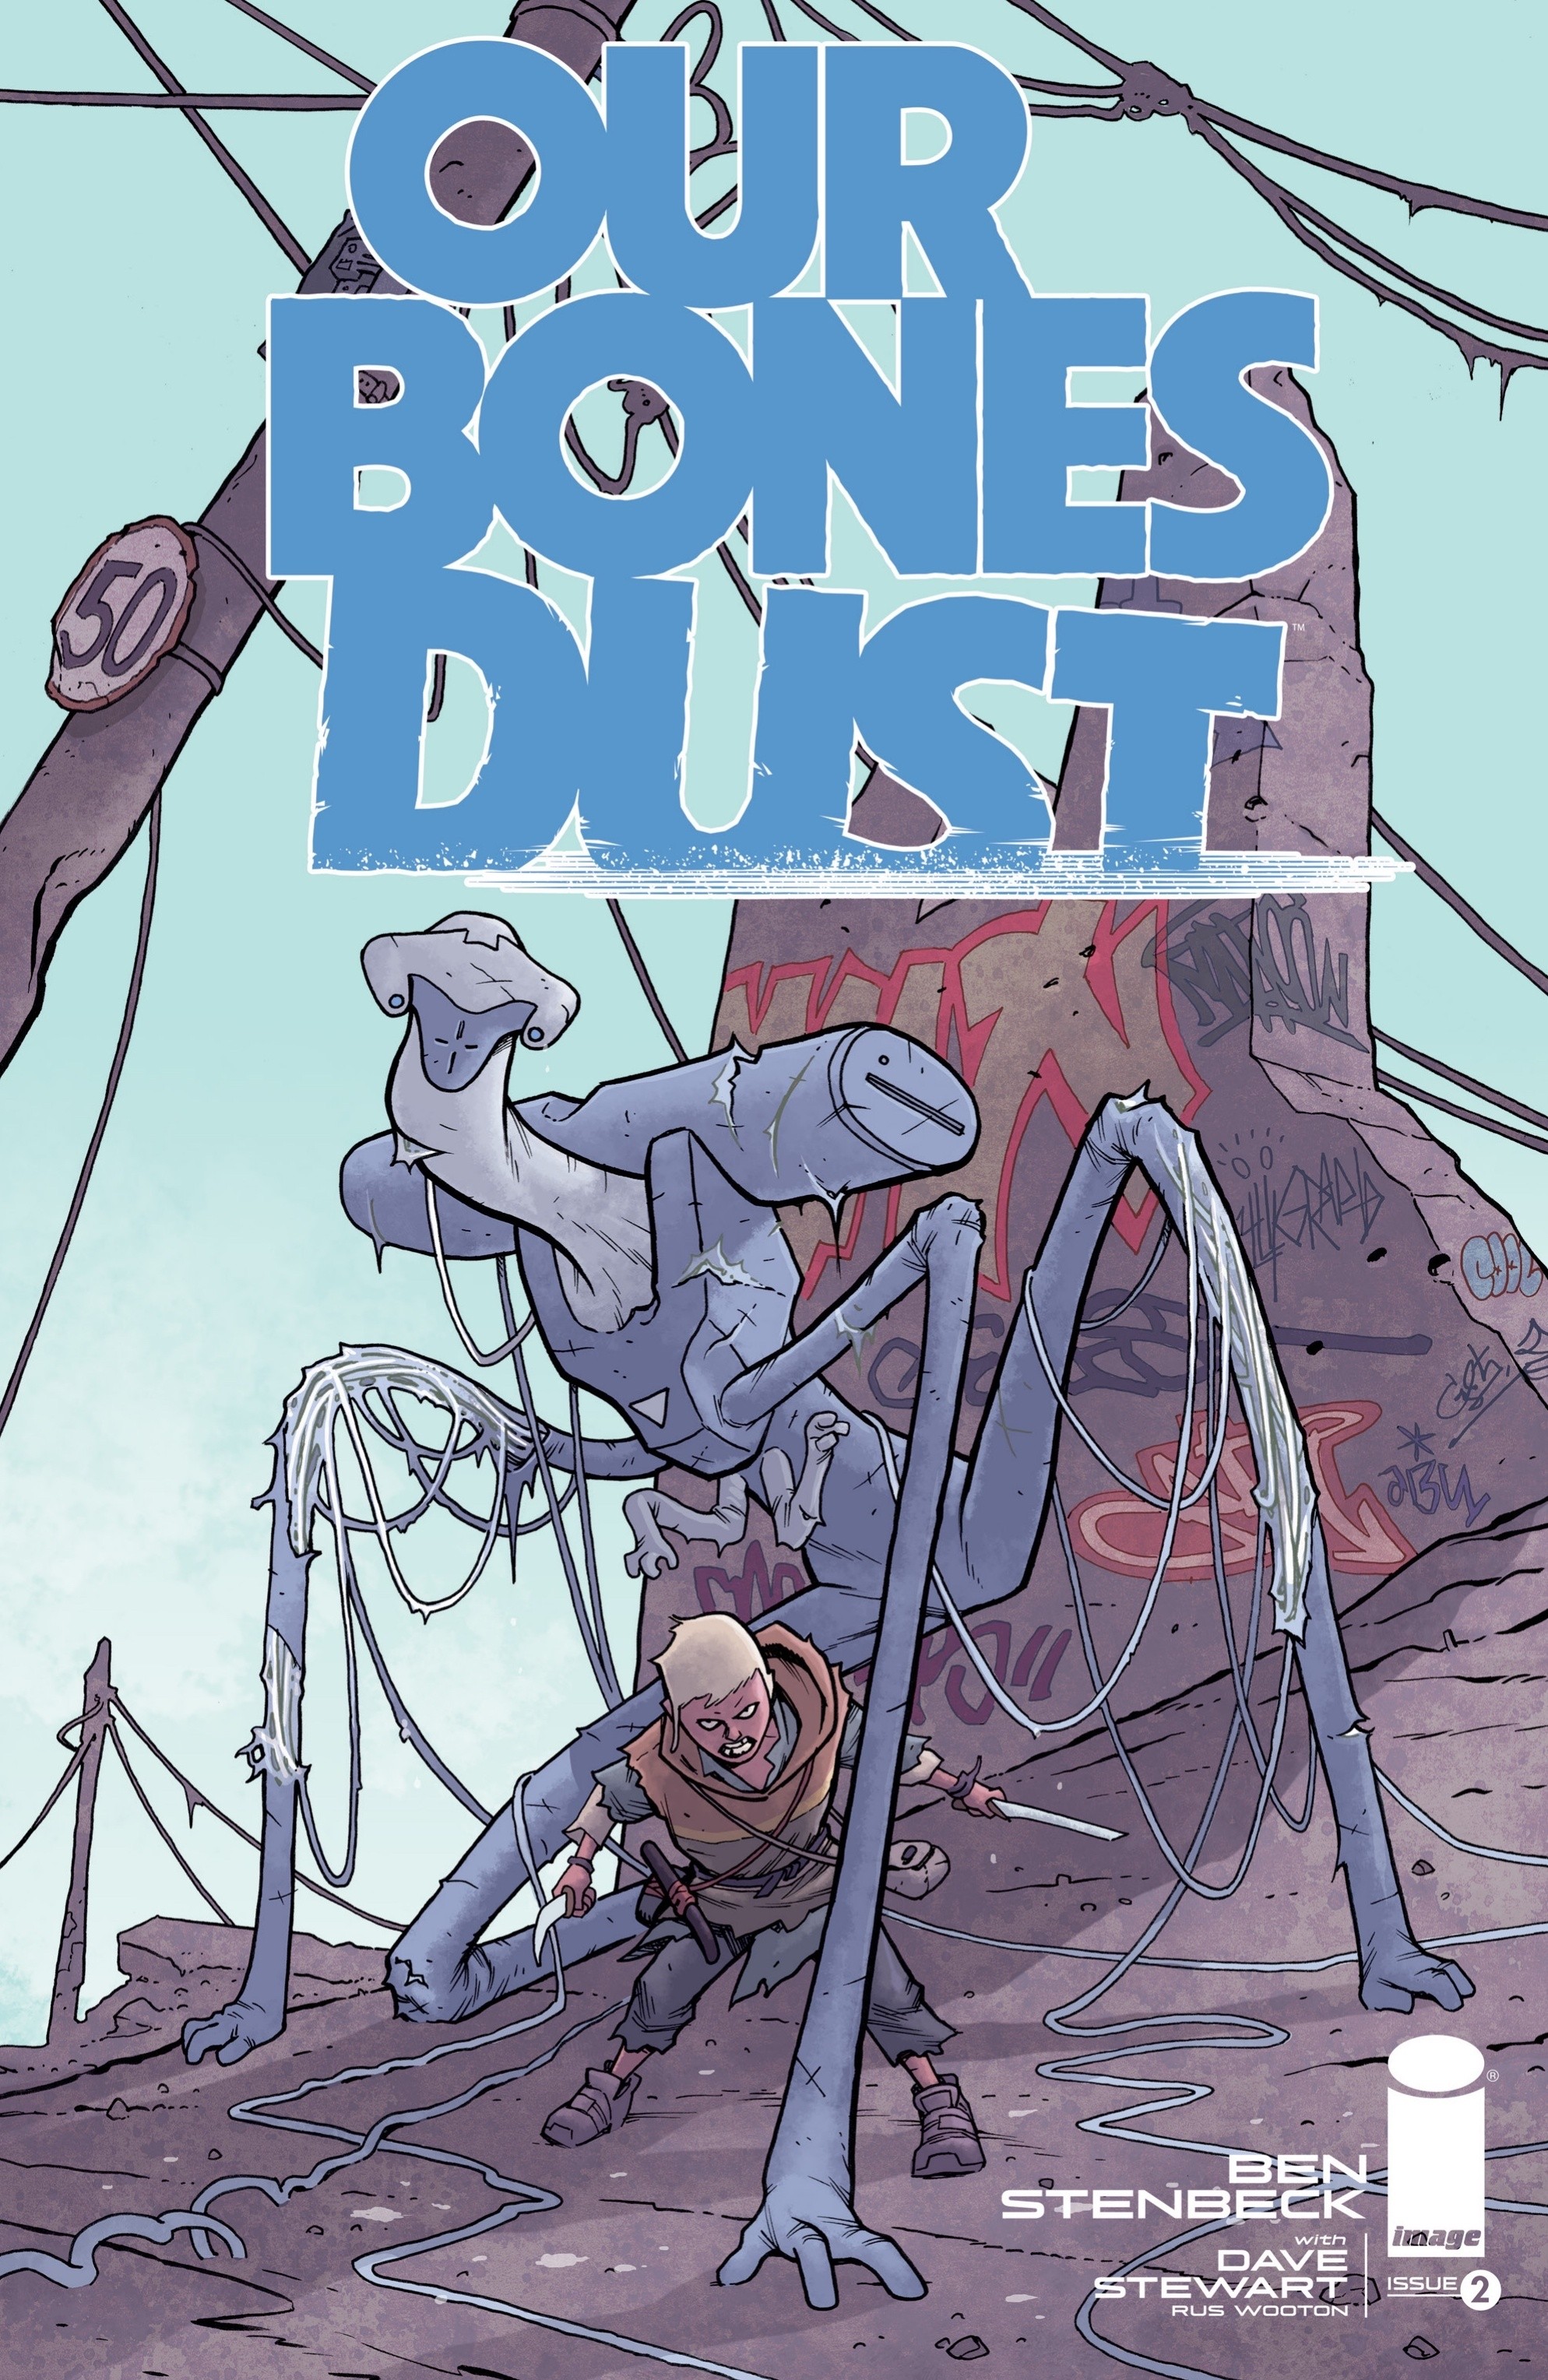 Read online Our Bones Dust comic -  Issue #2 - 1